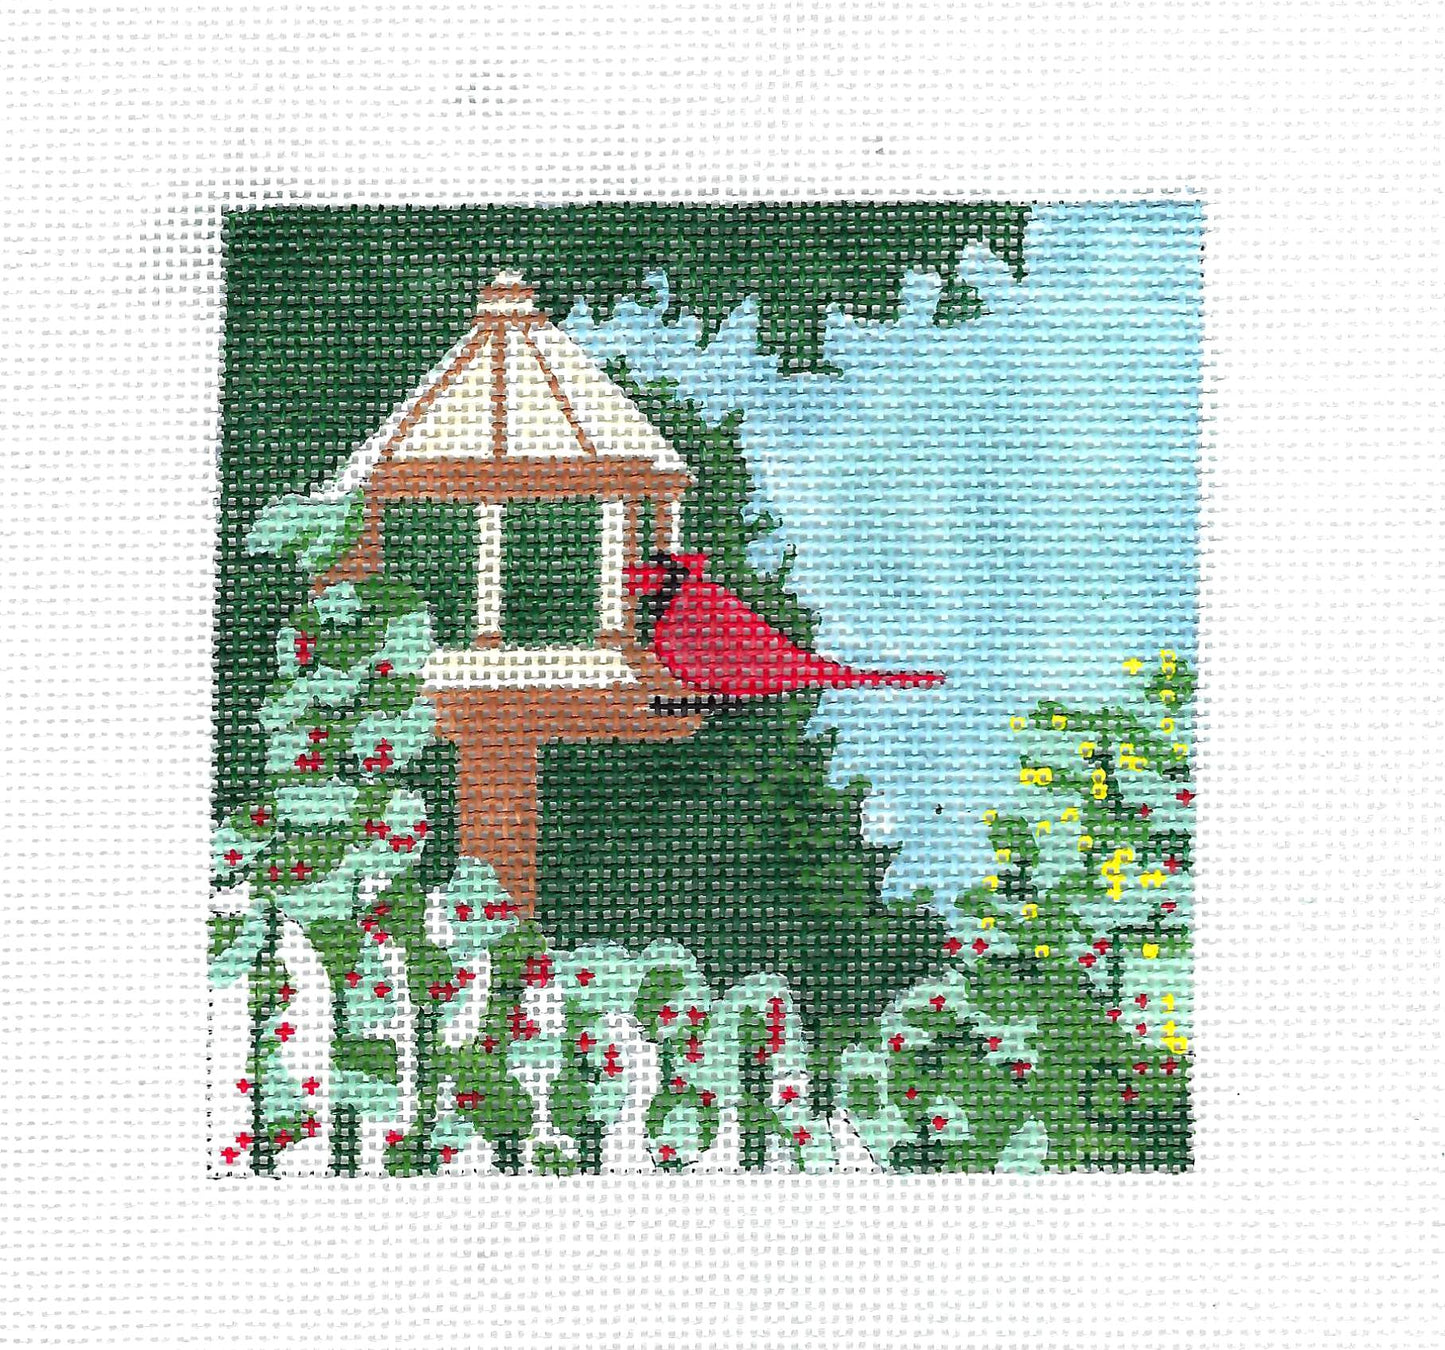 Coaster ~ Feeding Cardinals at the Feeder 4" Square handpainted Needlepoint Canvas by Gail Lang from Danji